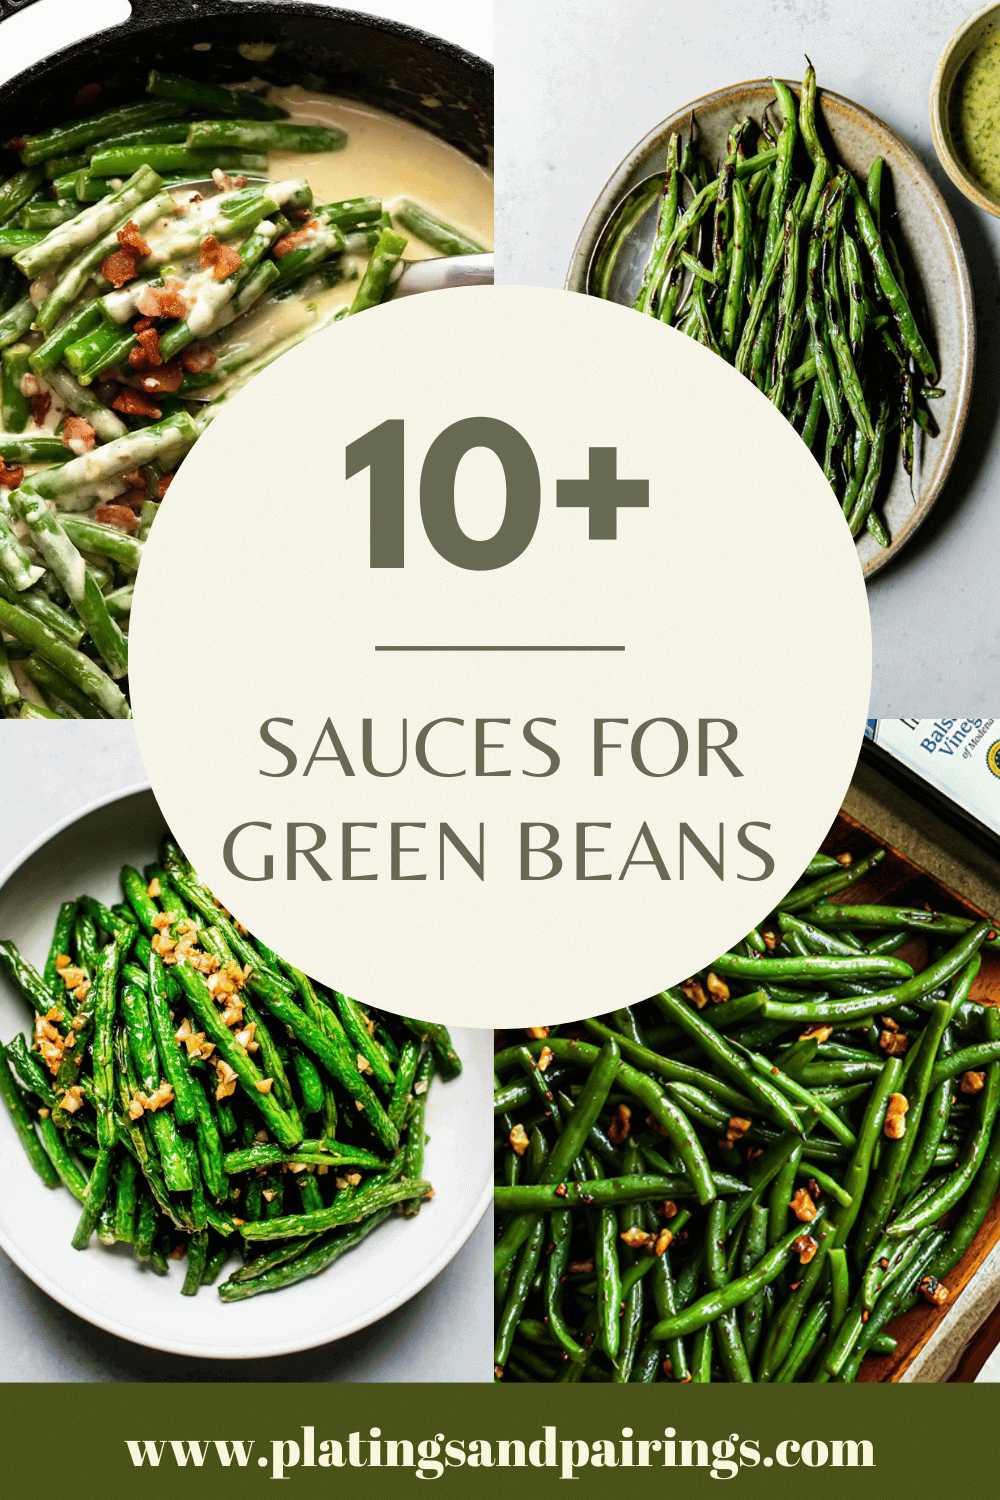 Collage of green bean sauces with text overlay.